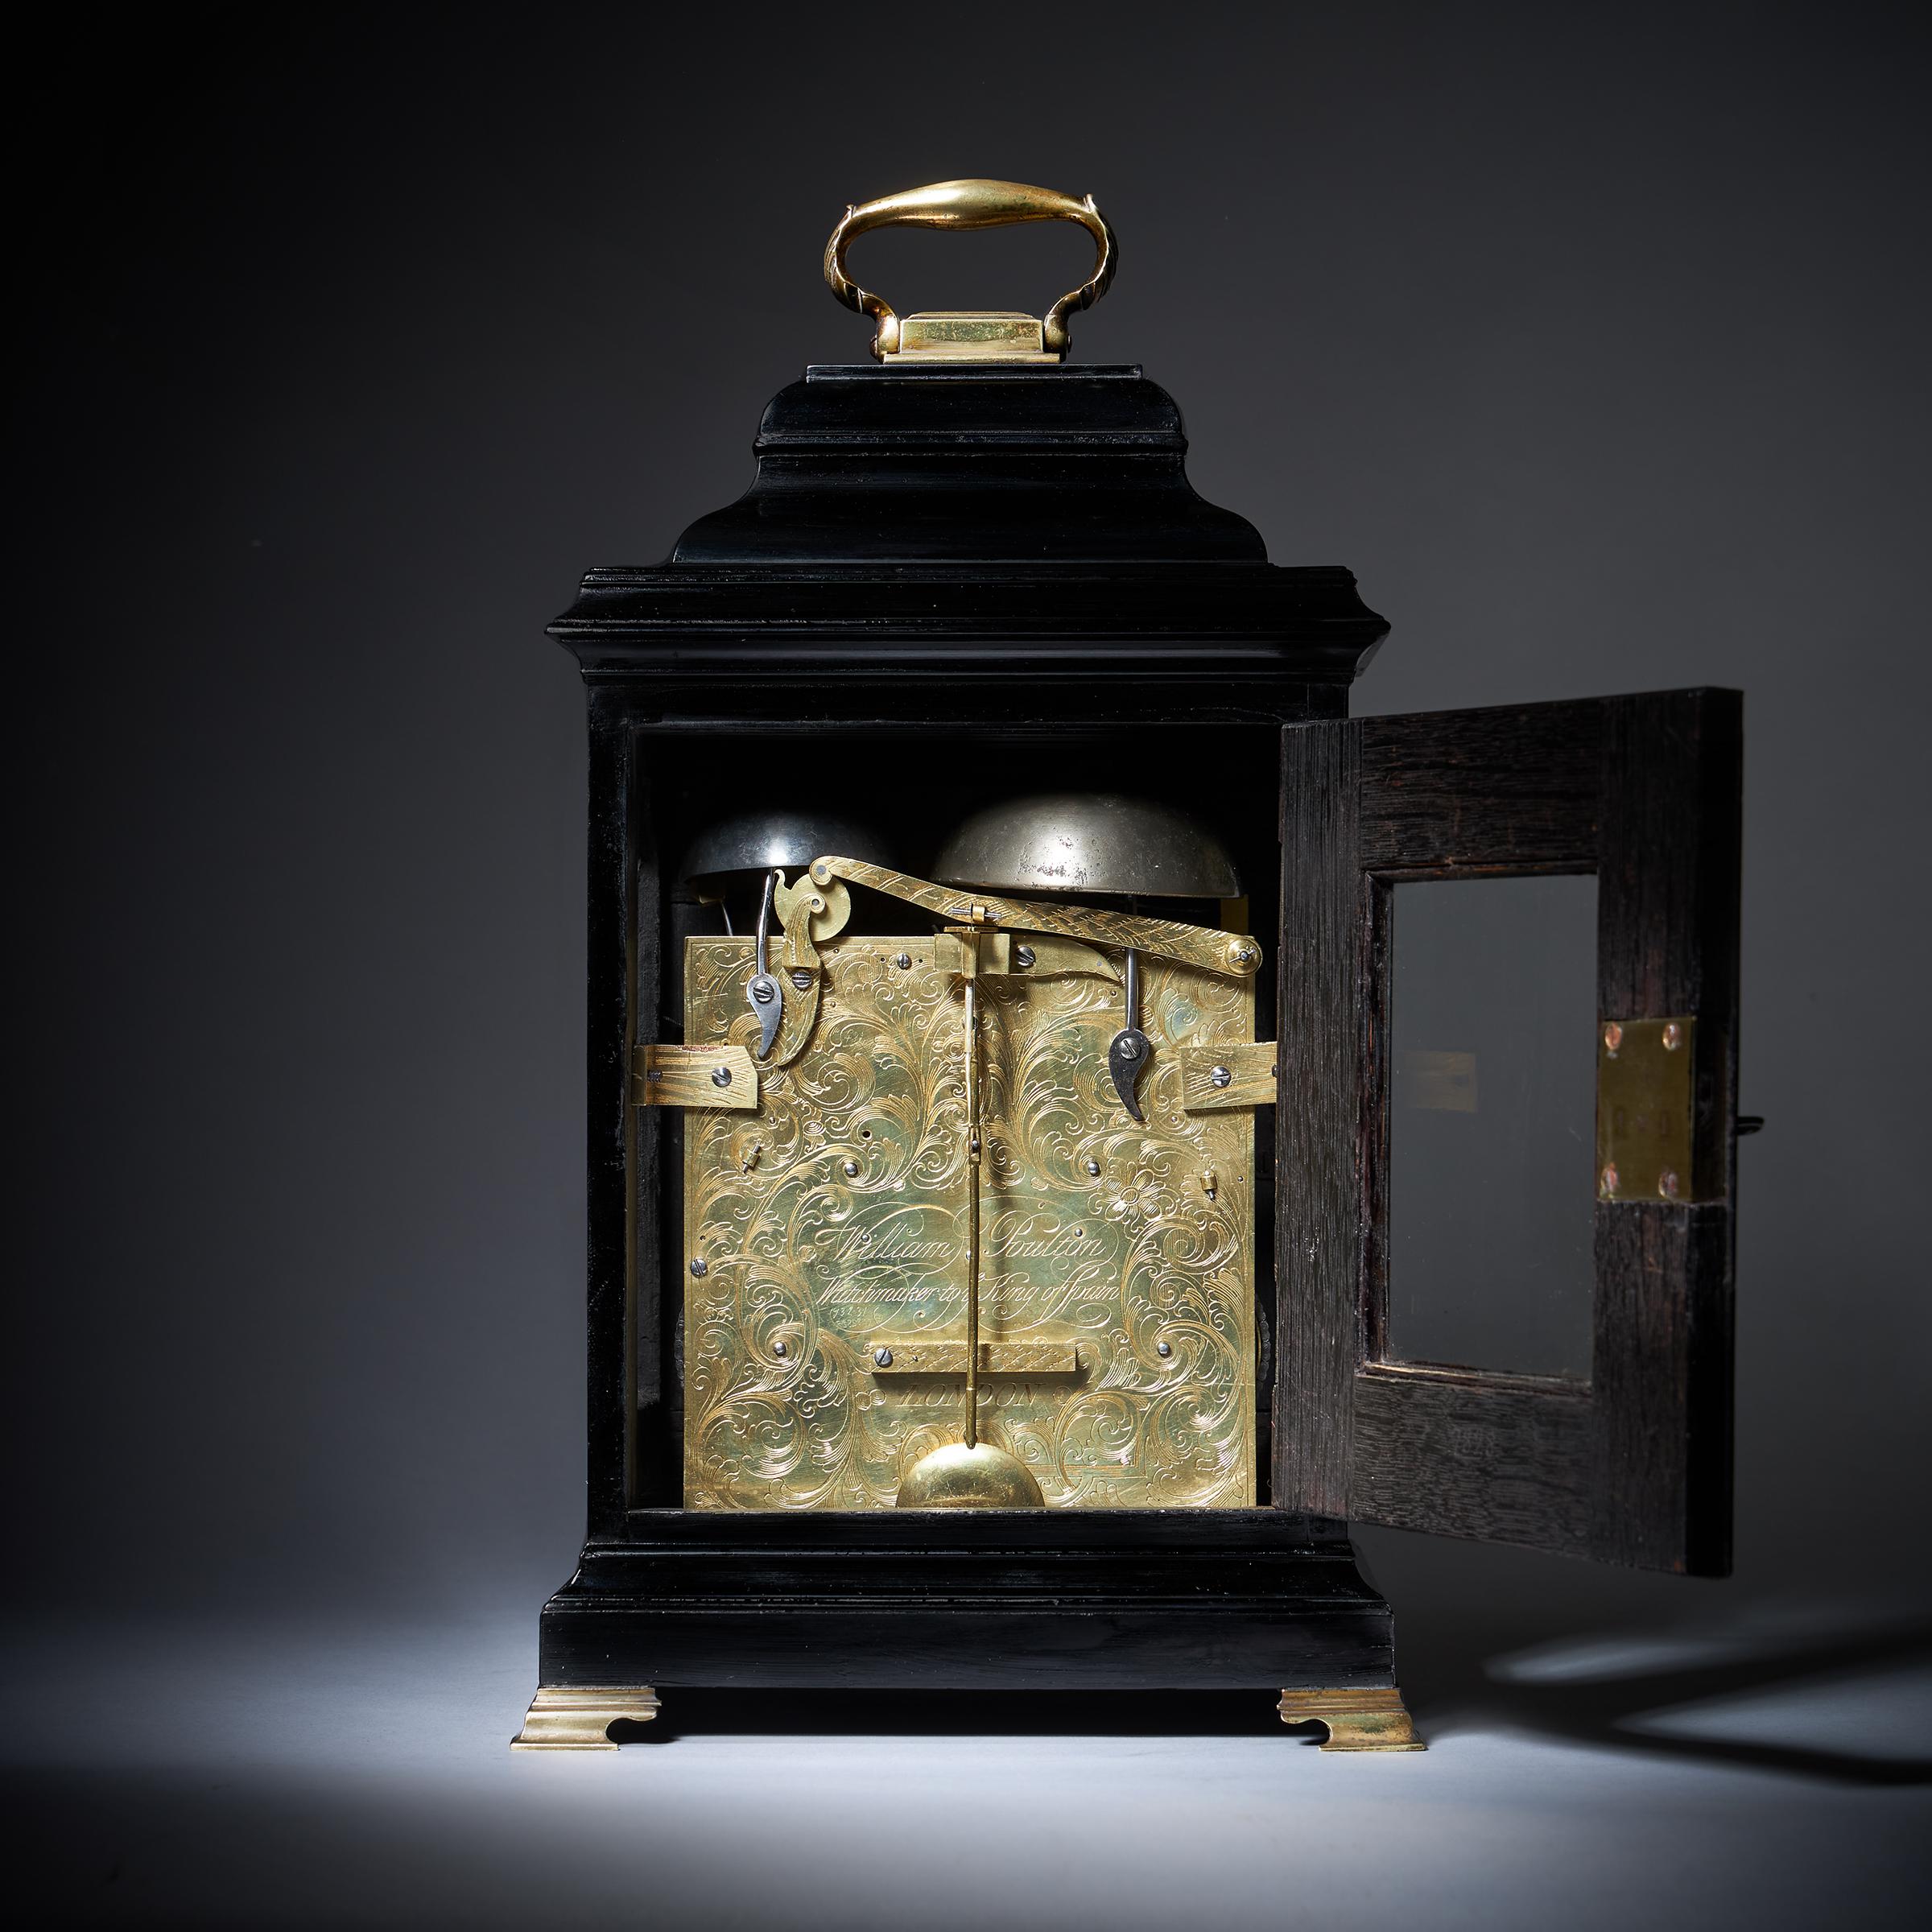 Ebony Rare 18th-Century Grande Sonnerie Striking table Clock by William Poulton For Sale